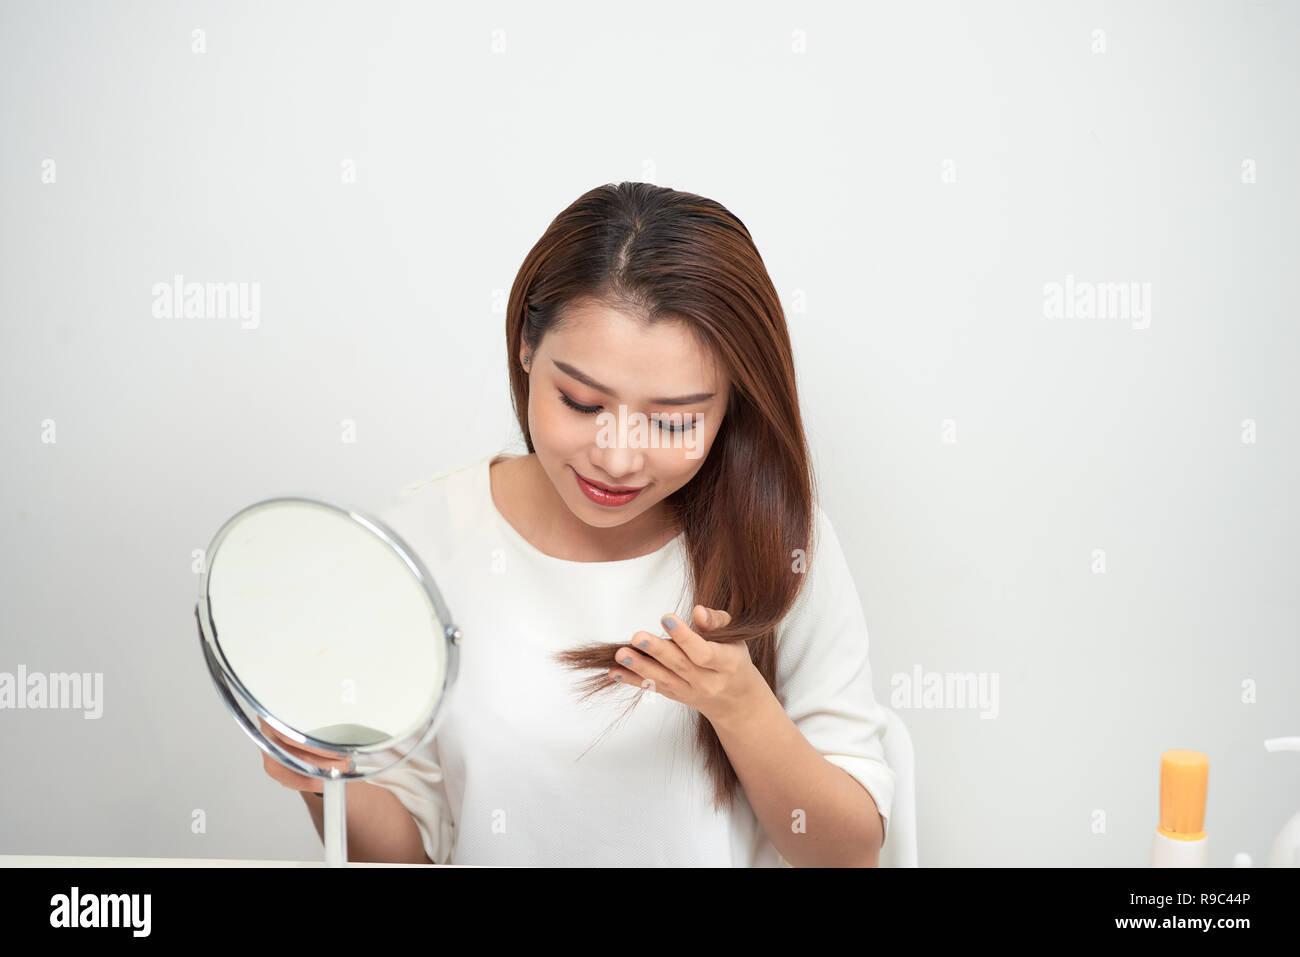 Isolated portrait of a beautiful young woman comb long hair Stock Photo